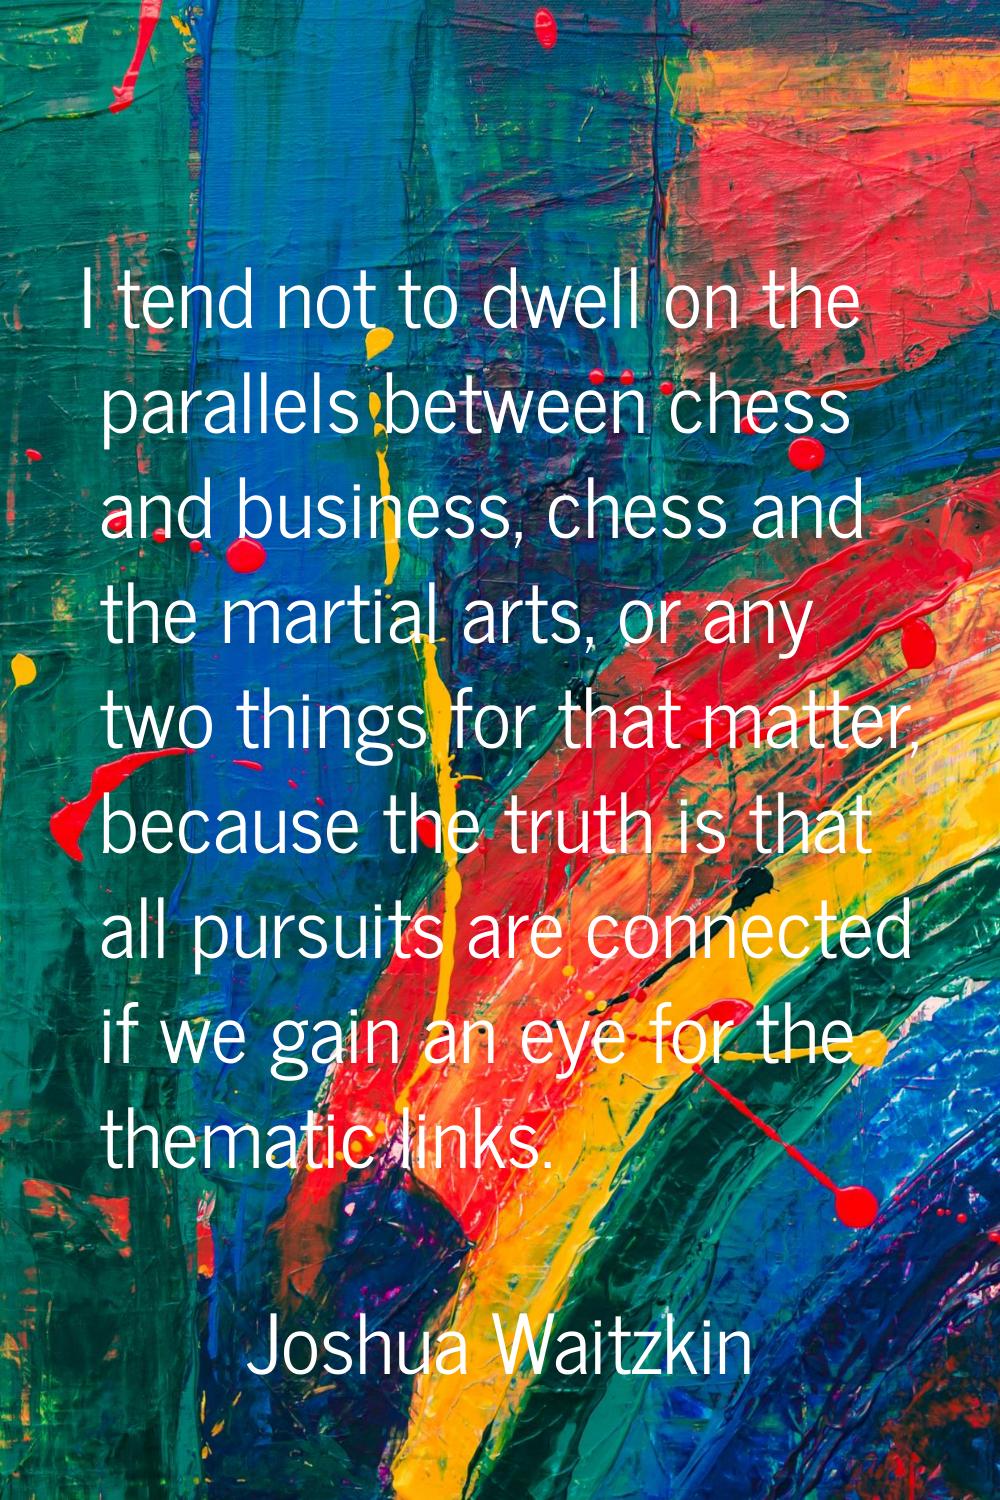 I tend not to dwell on the parallels between chess and business, chess and the martial arts, or any